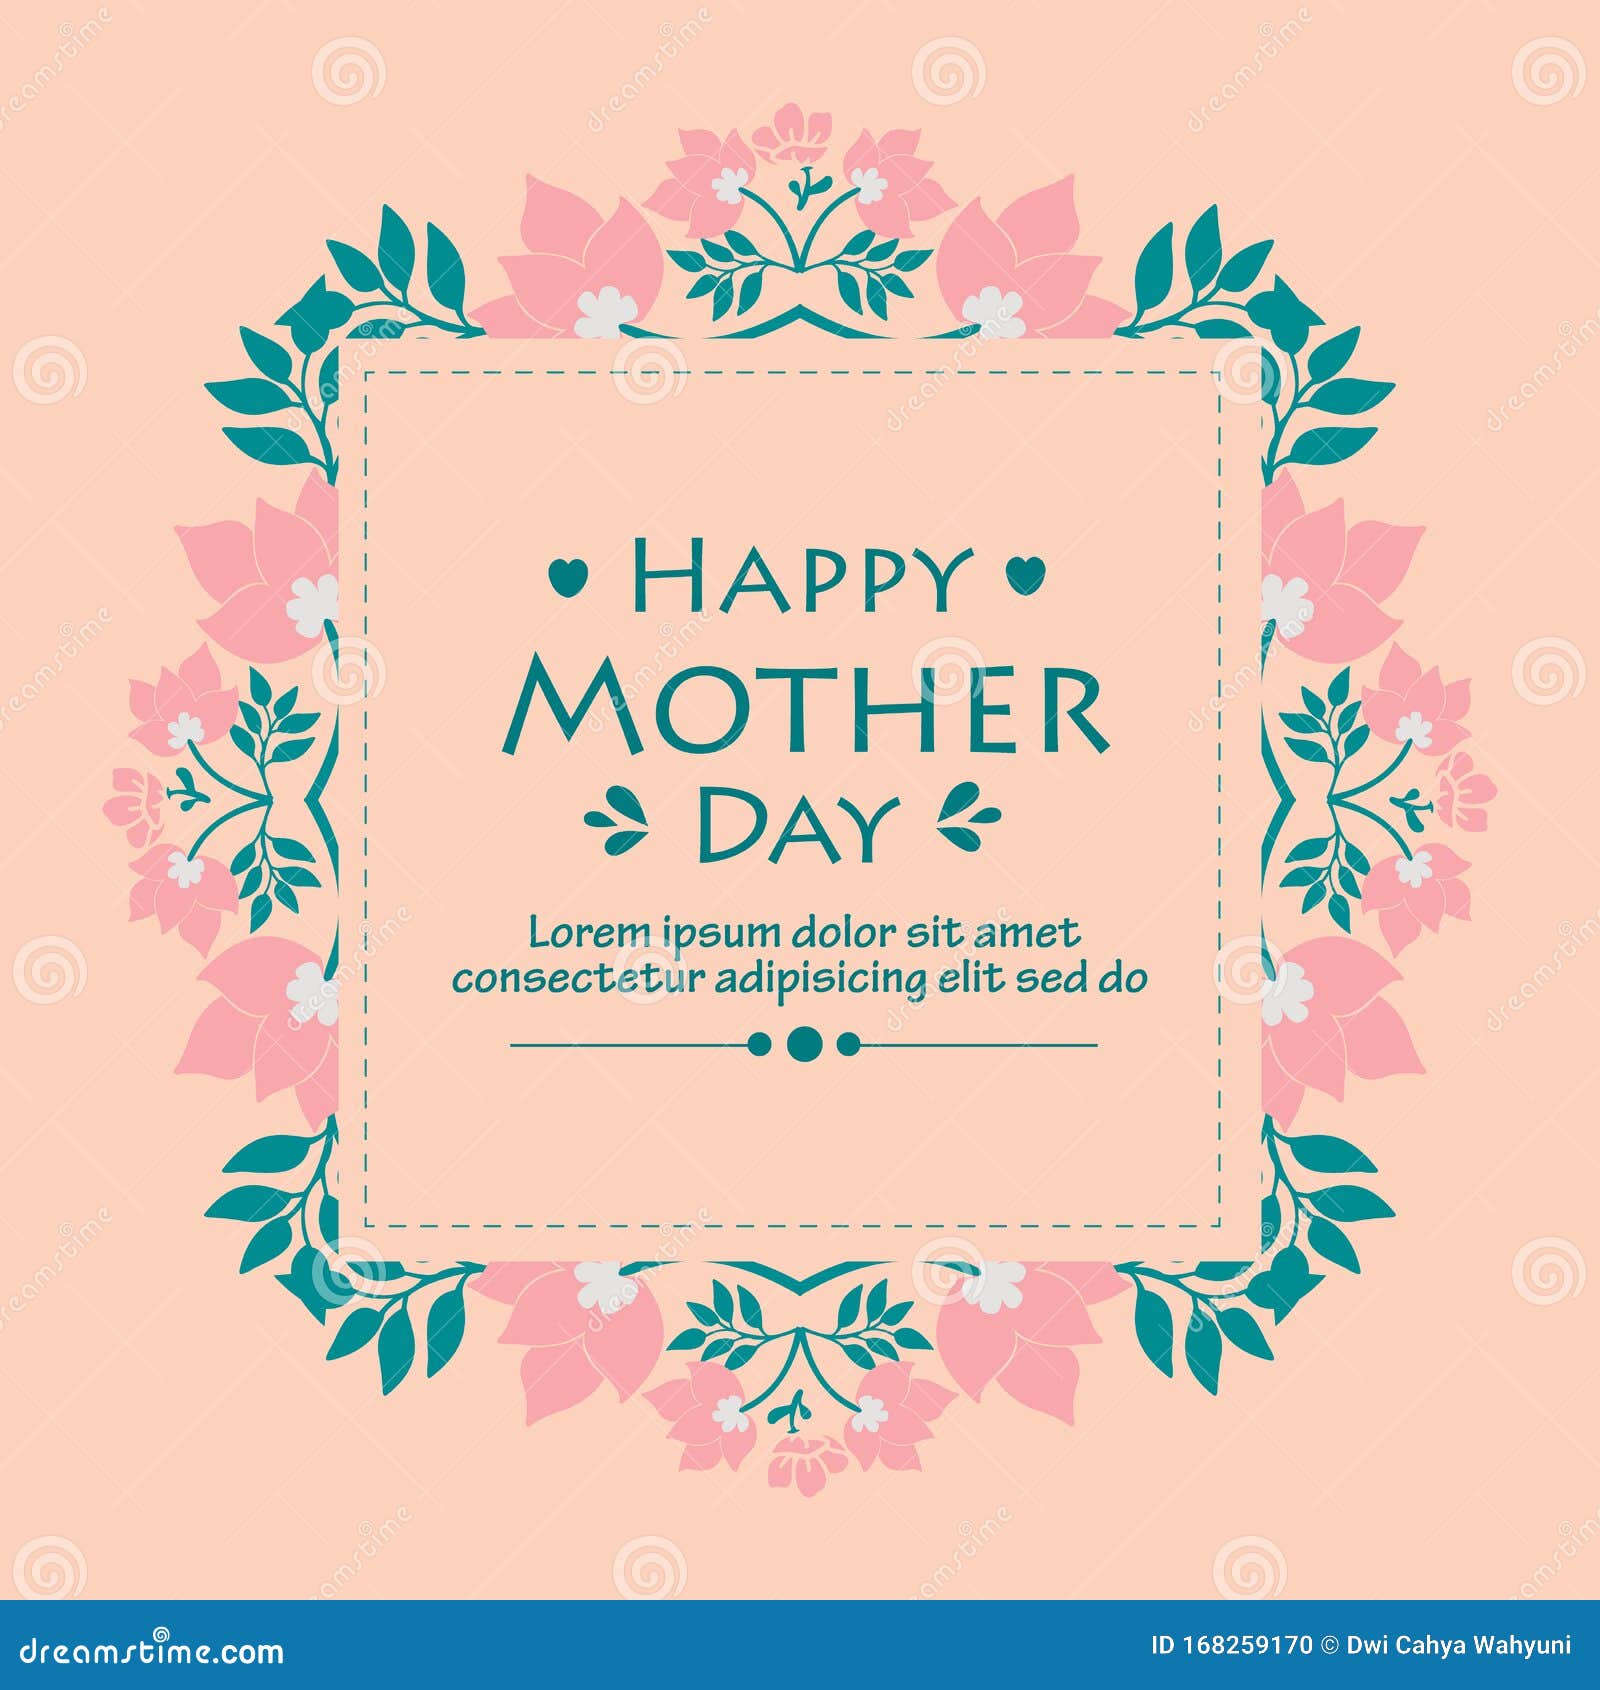 Mother's Day Wallpapers - Mothersdaycelebration.com